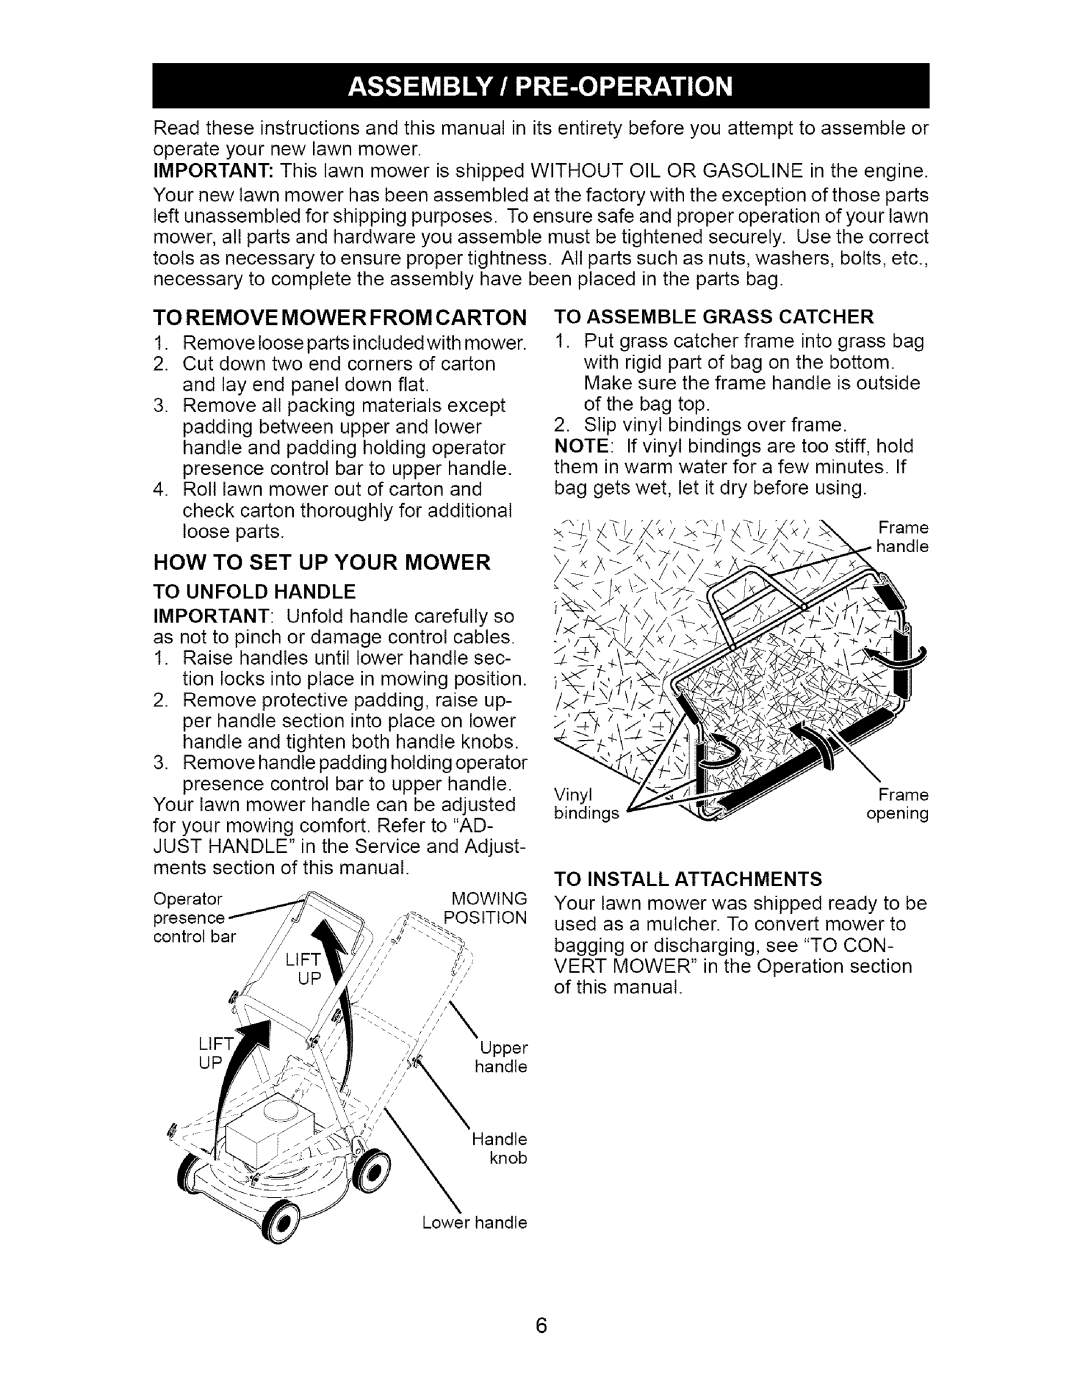 Craftsman 917.376671 How To Set Up Your Mower, To Remove Mower From Carton, To Unfold Handle, To Install Attachments 